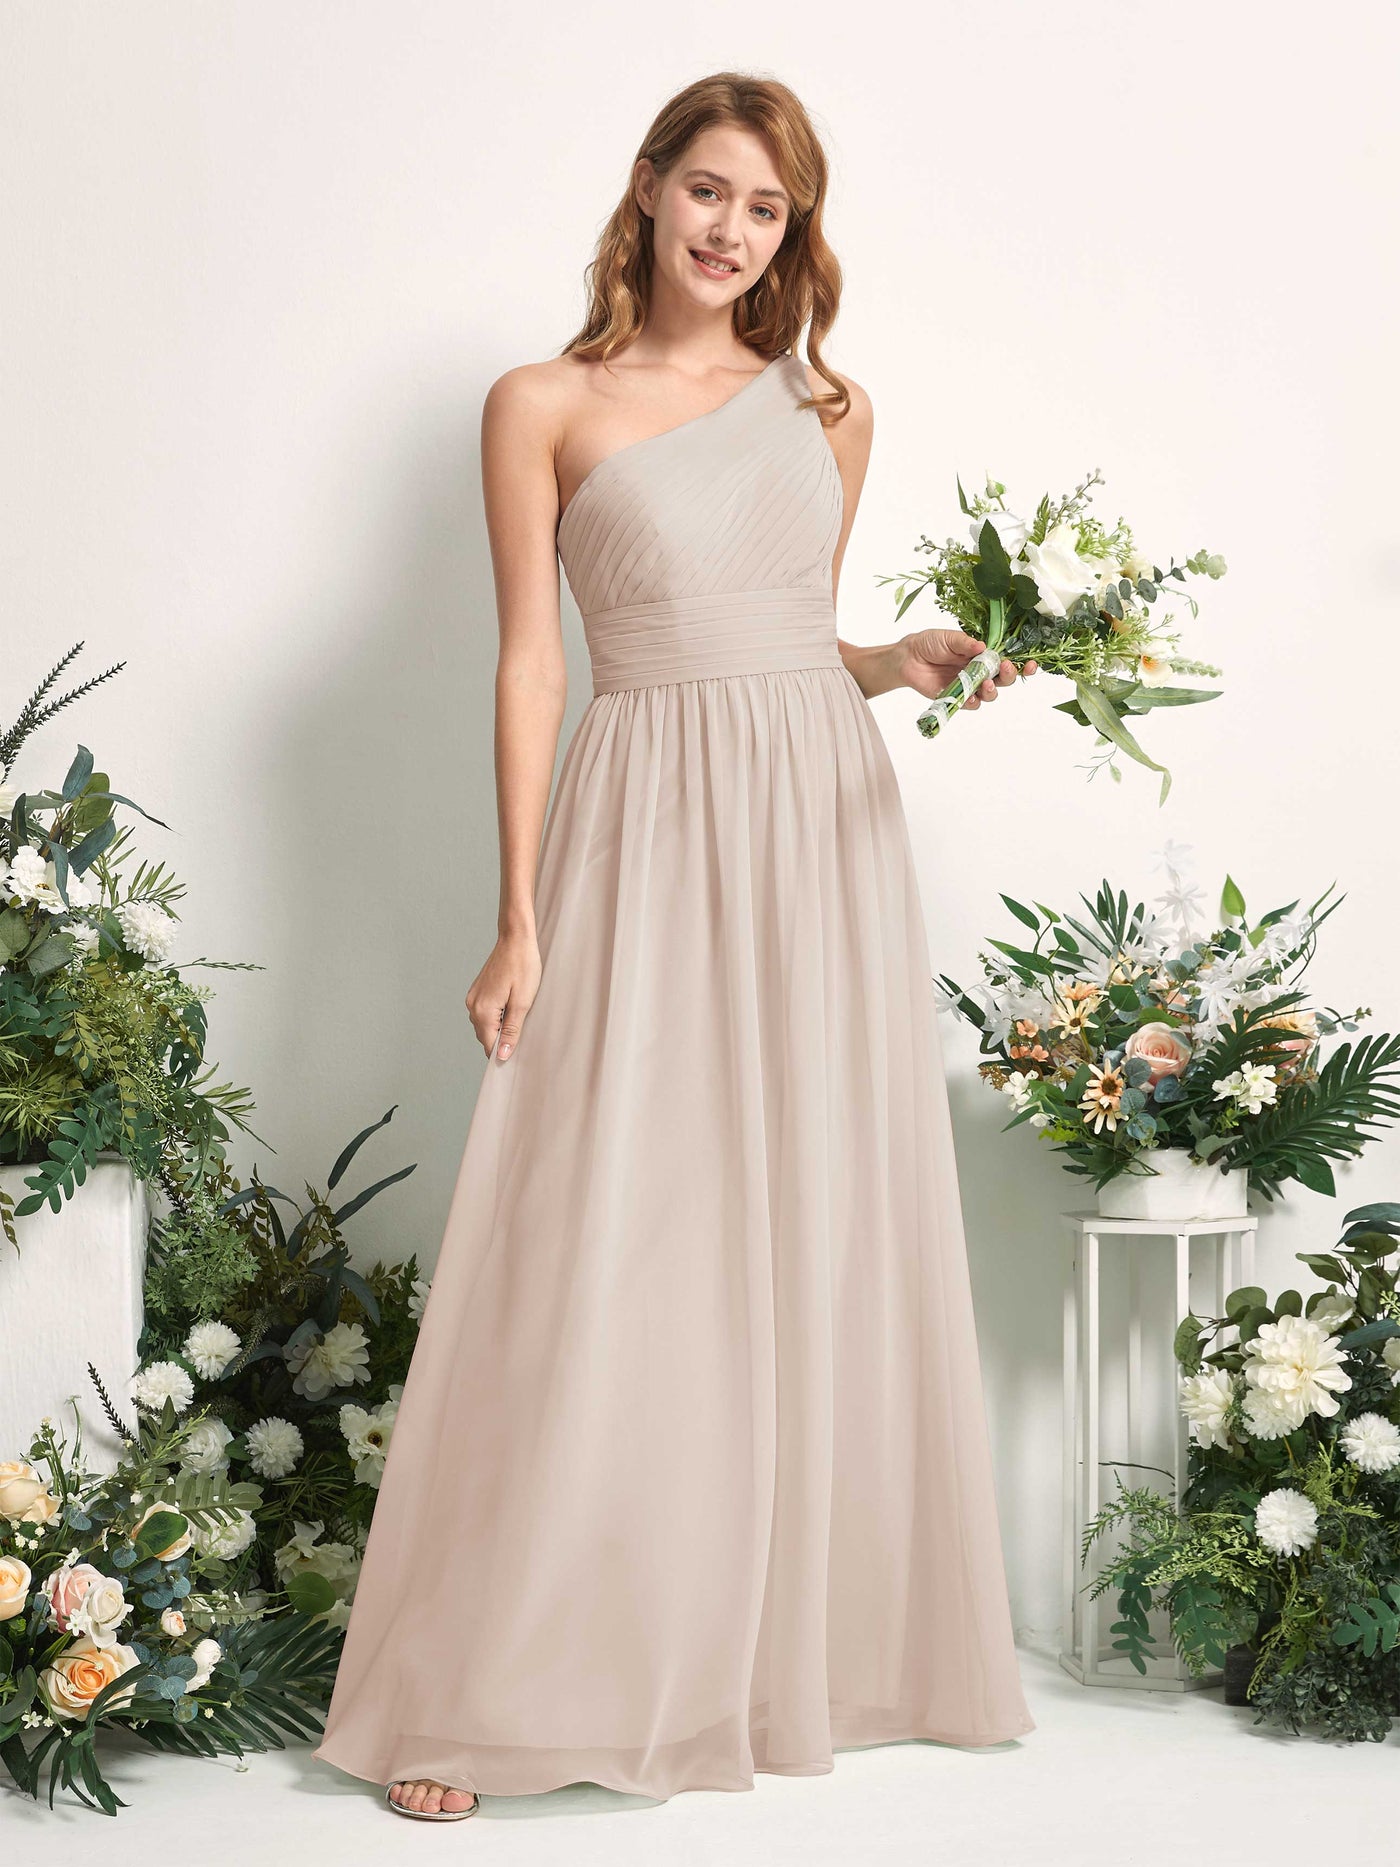 Bridesmaid Dress A-line Chiffon One Shoulder Full Length Sleeveless Wedding Party Dress - Champagne (81226716)#color_champagne